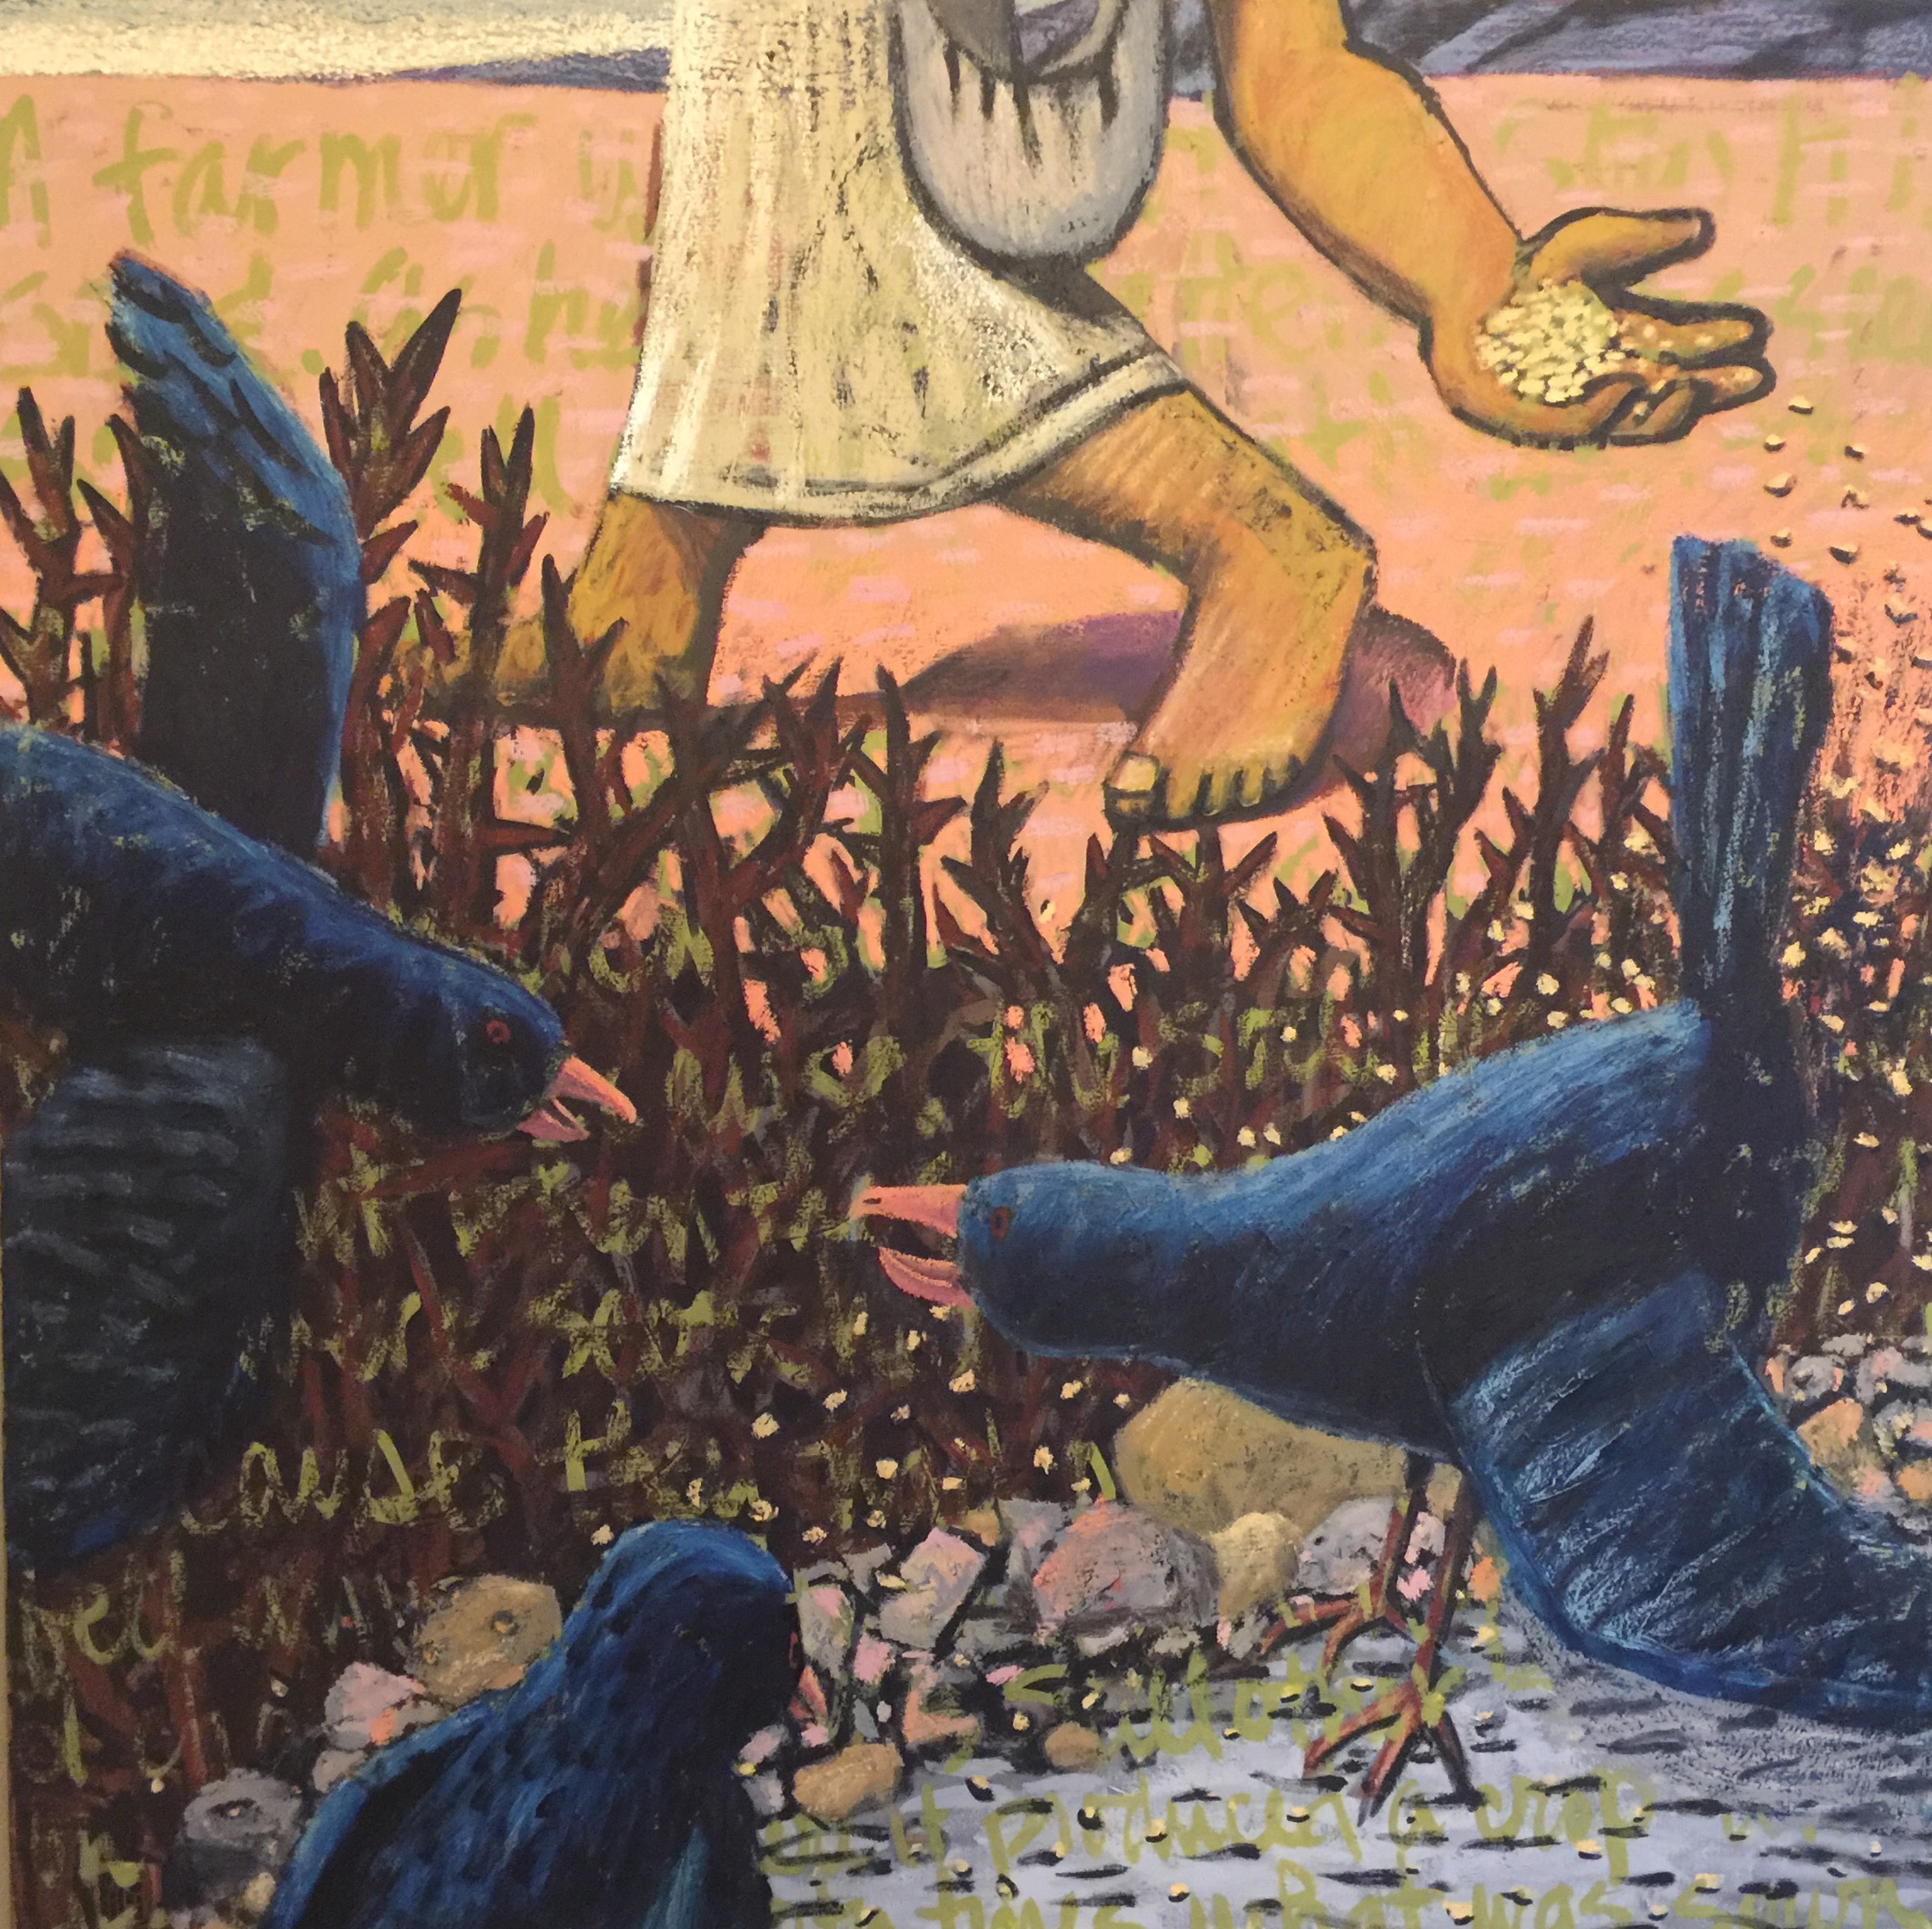 Sower, seeds and birds, hearing, healing